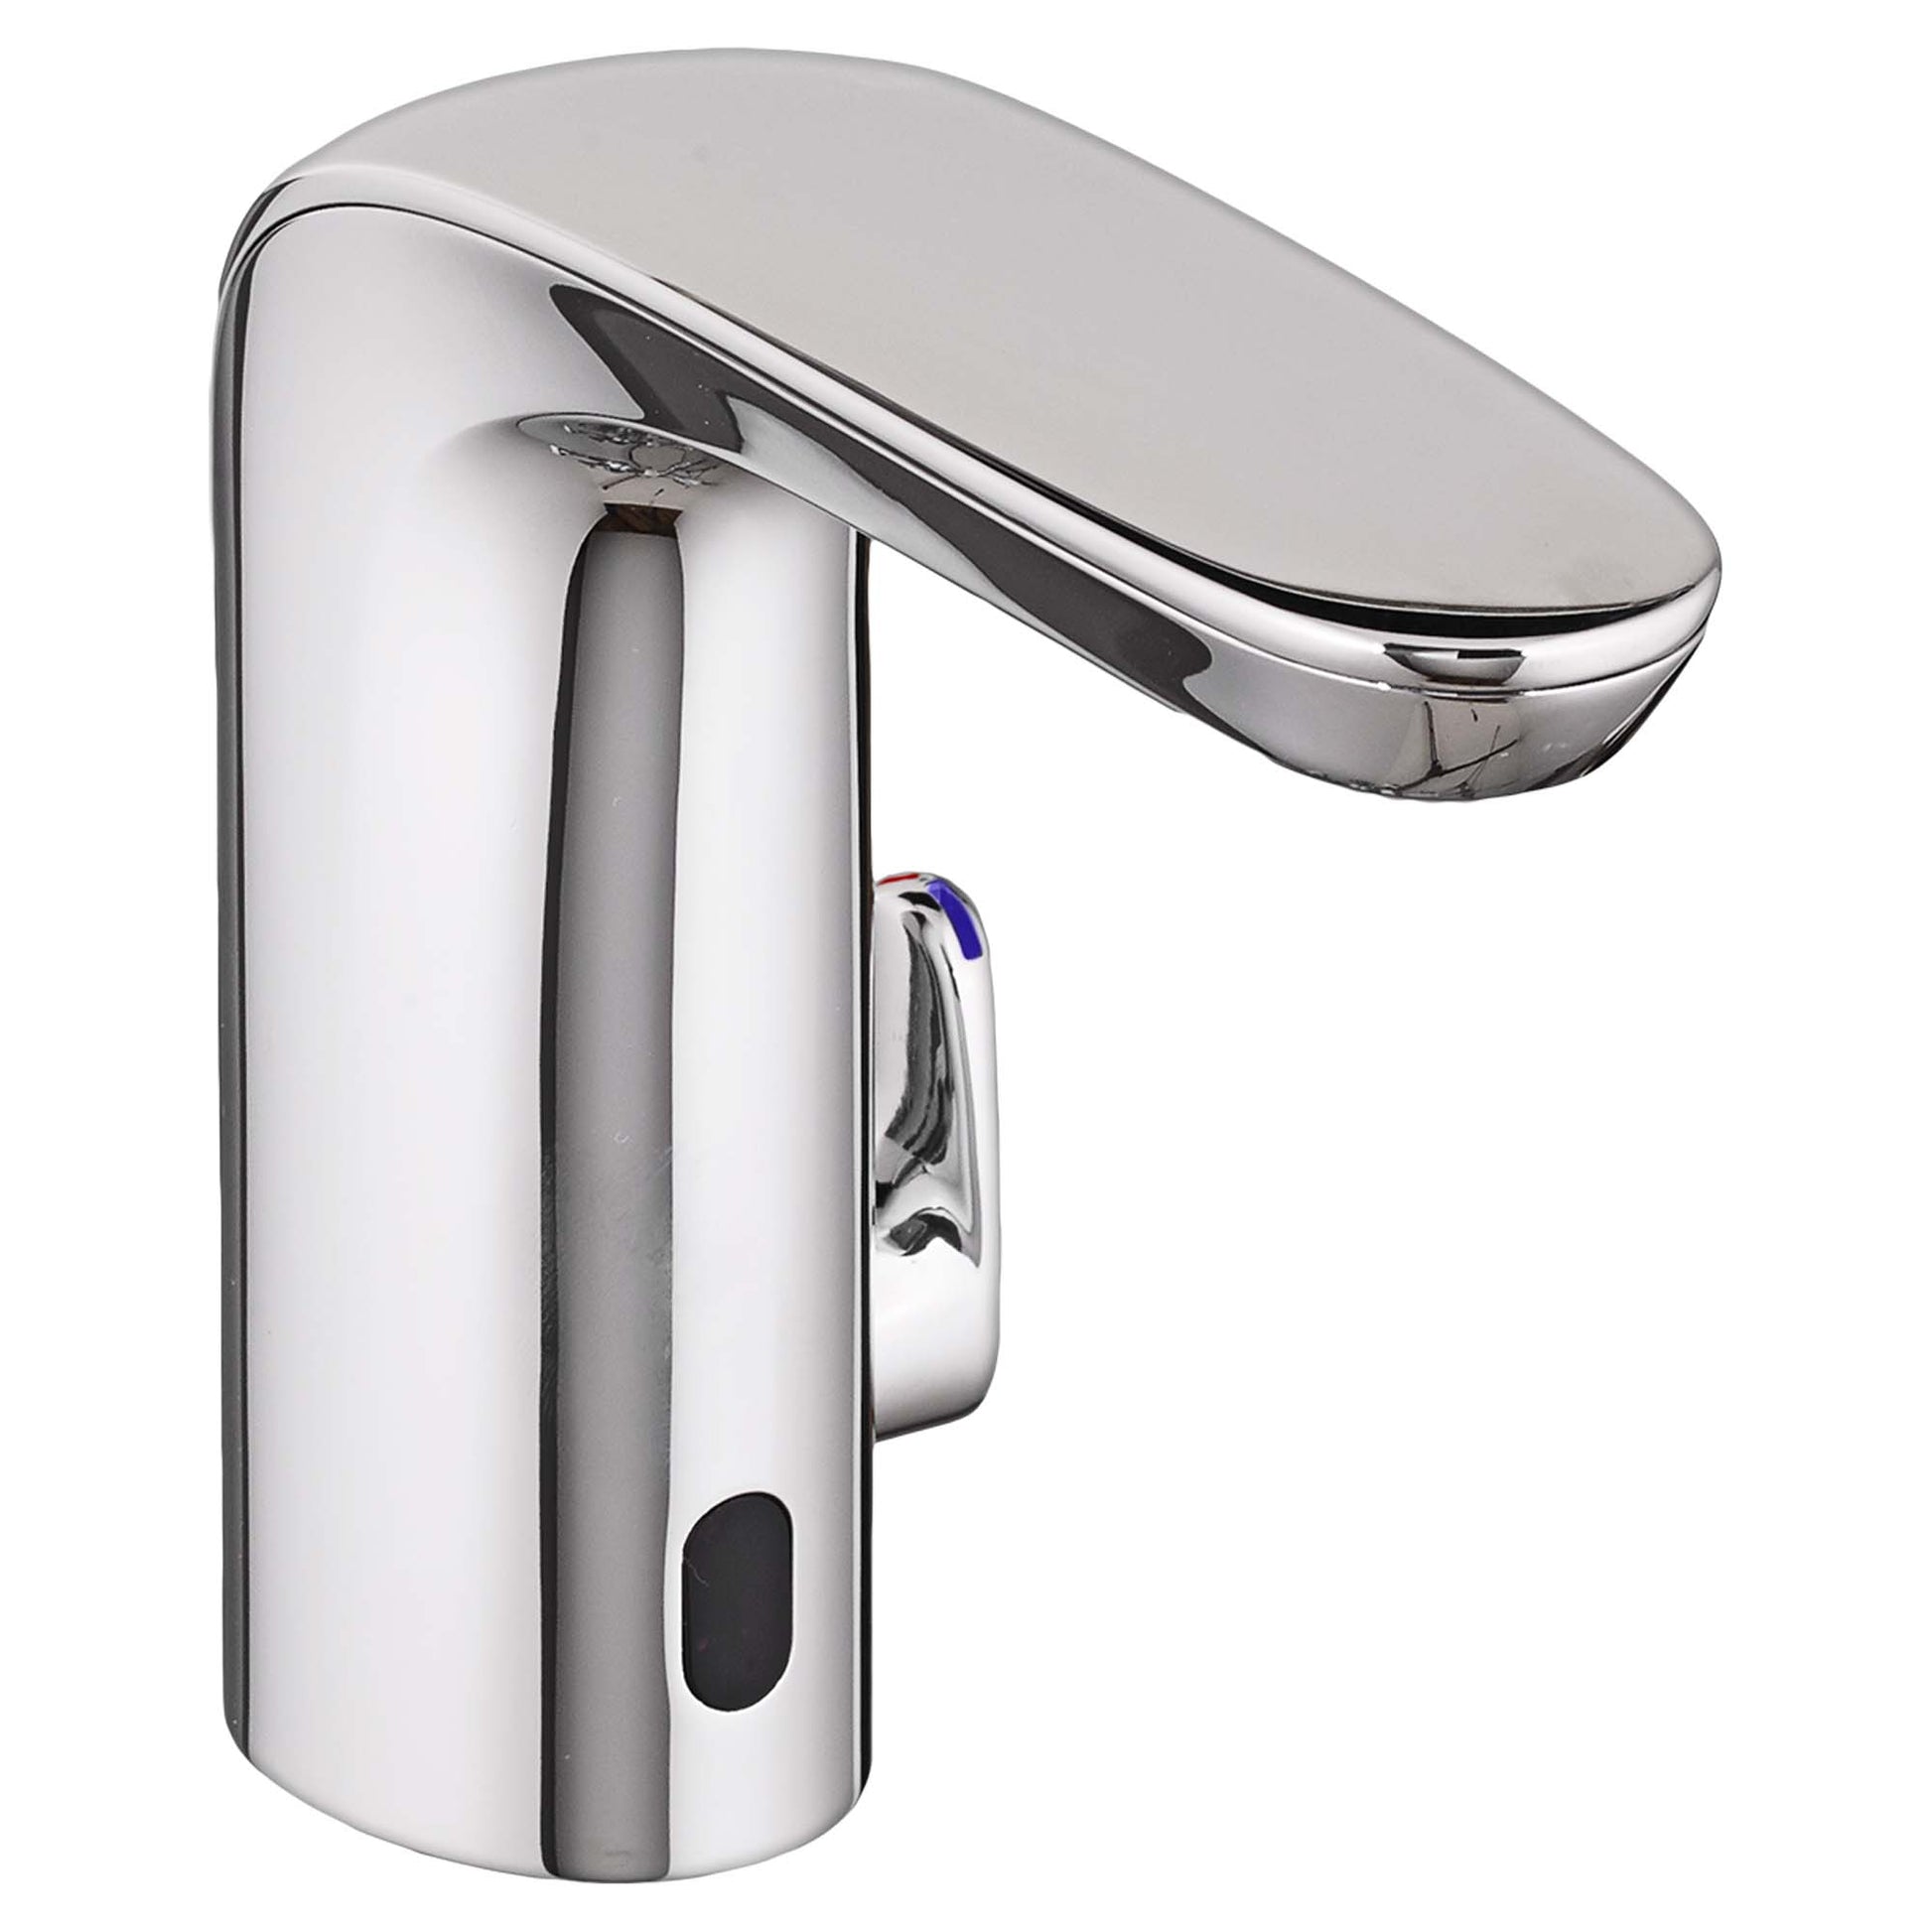 AMERICAN-STANDARD 775B305.002, NextGen Selectronic Touchless Faucet, Base Model With SmarTherm Safety Shut-Off + ADM, 0.5 gpm/1.9 Lpm in Chrome